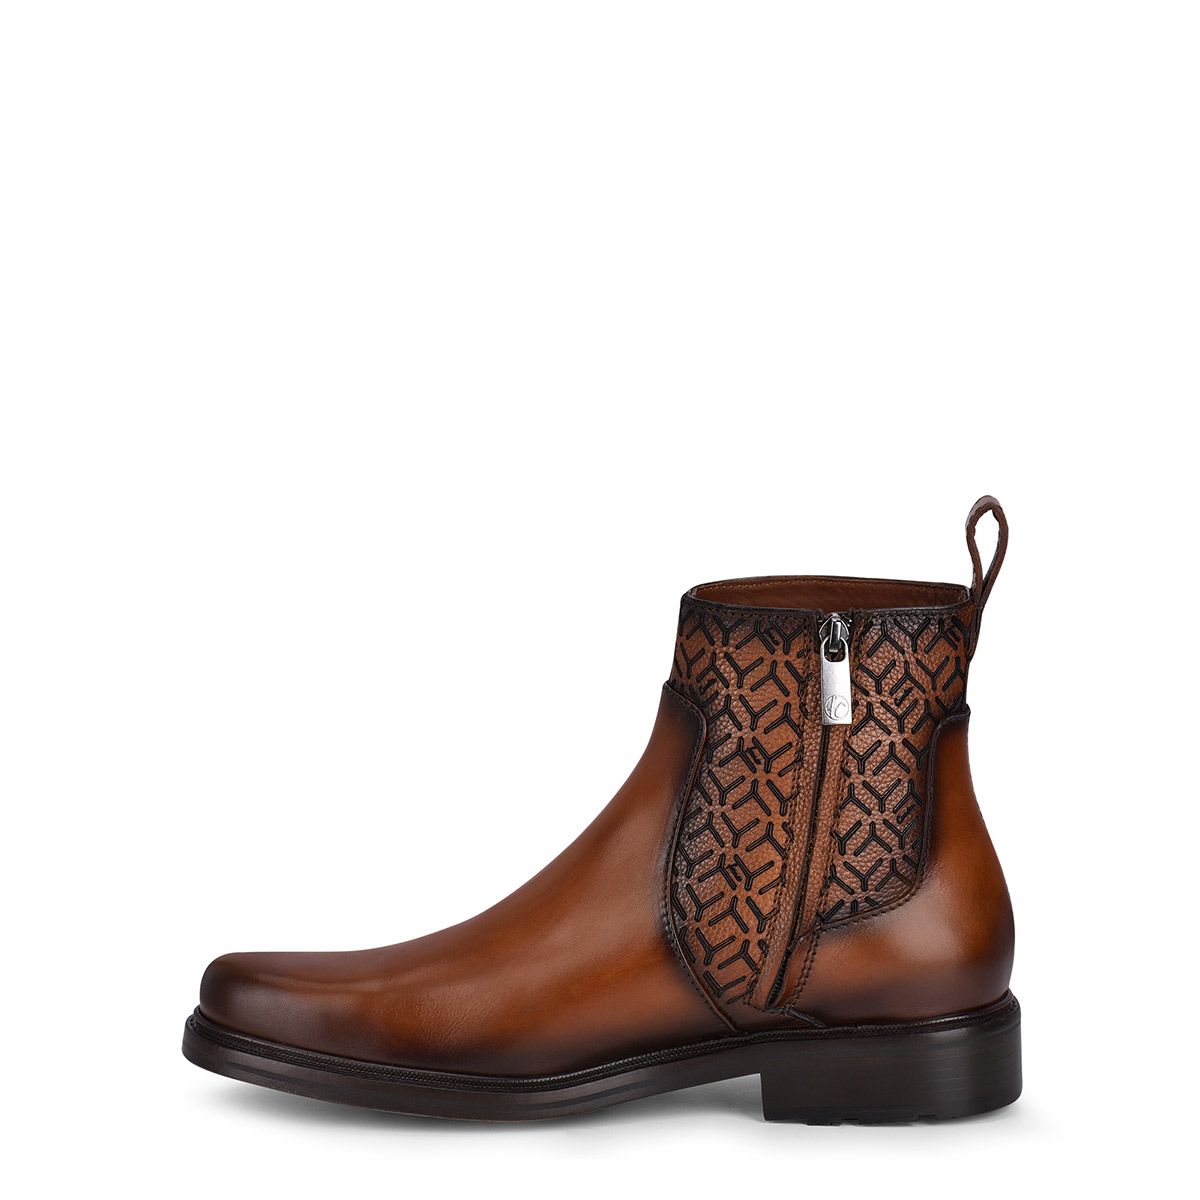 Engraved hand-painted honey leather chelsea boots